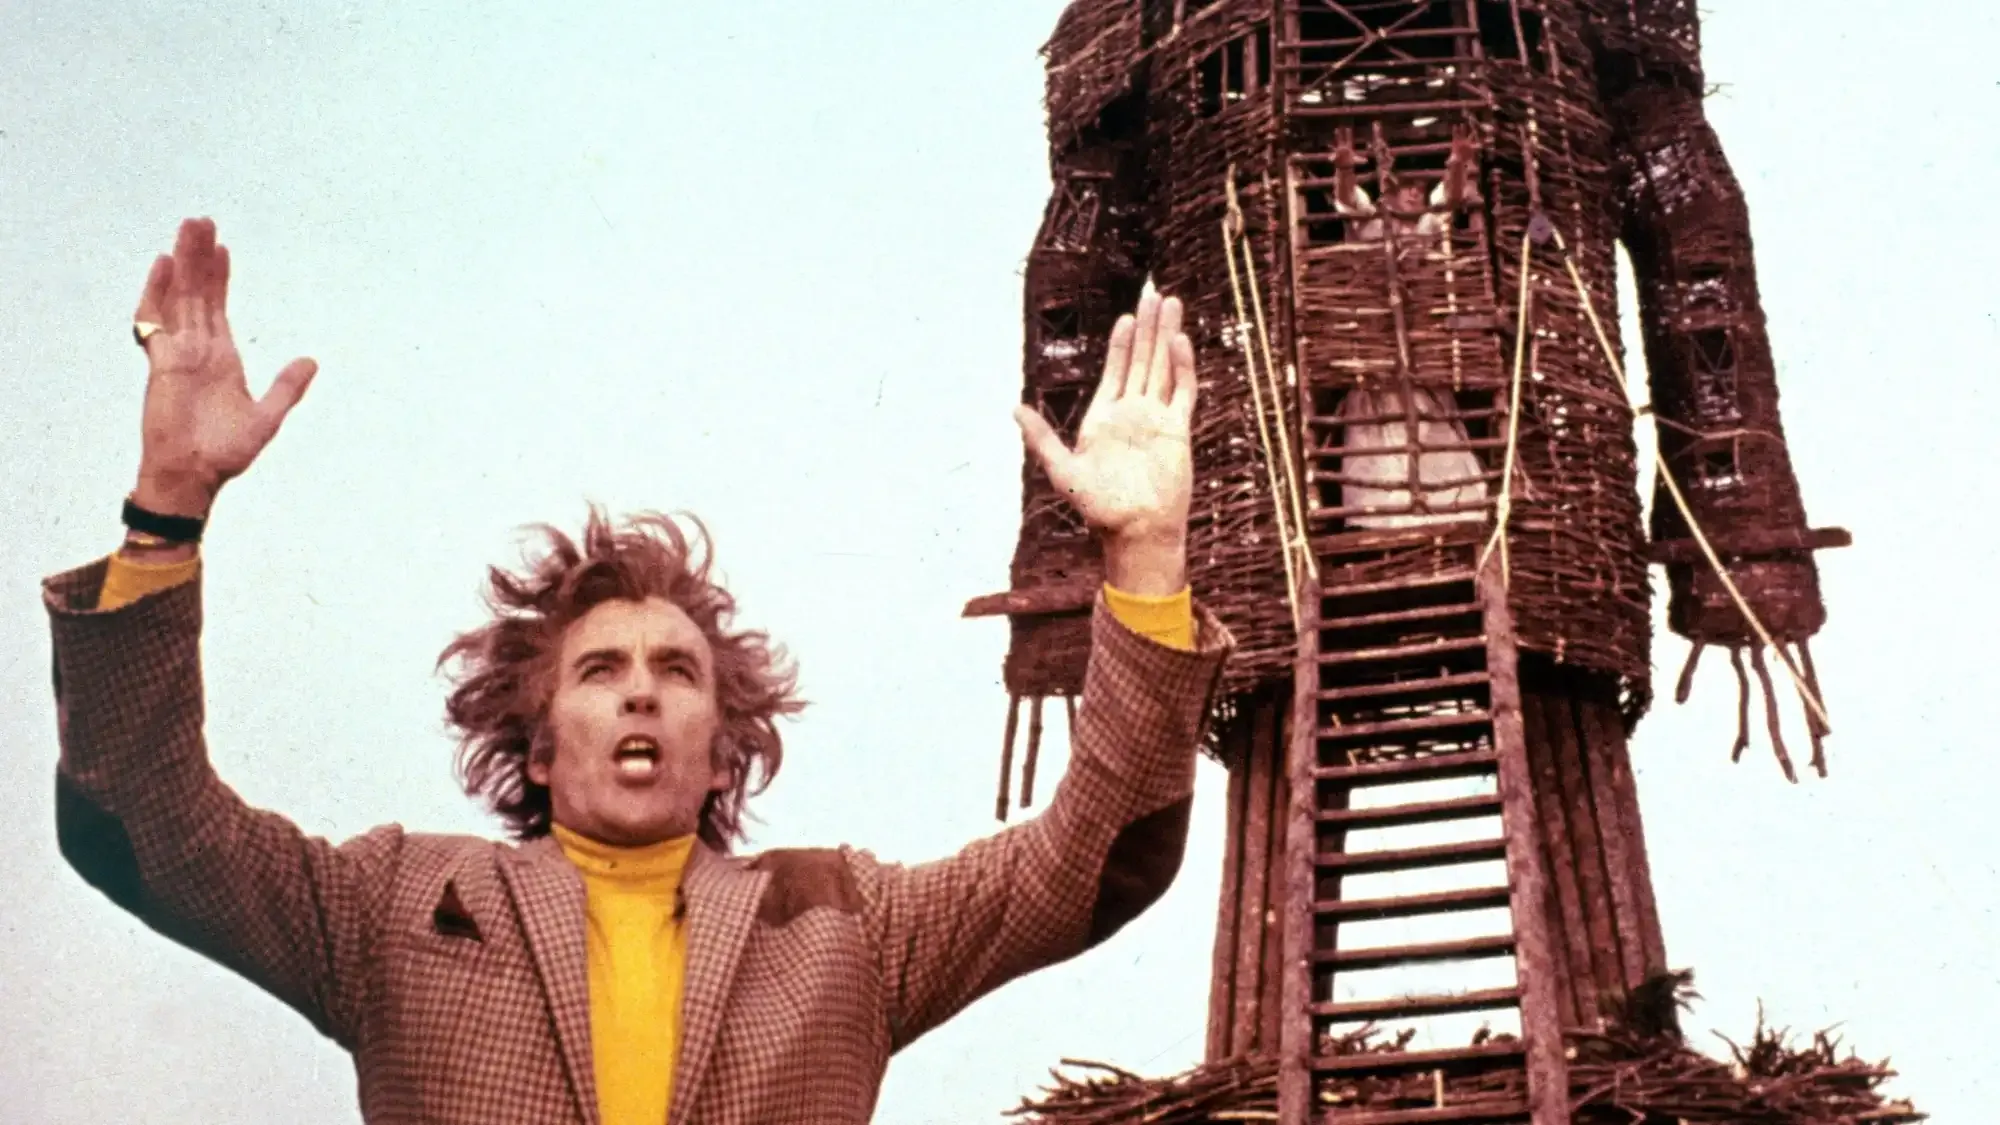 The Wicker Man movie review